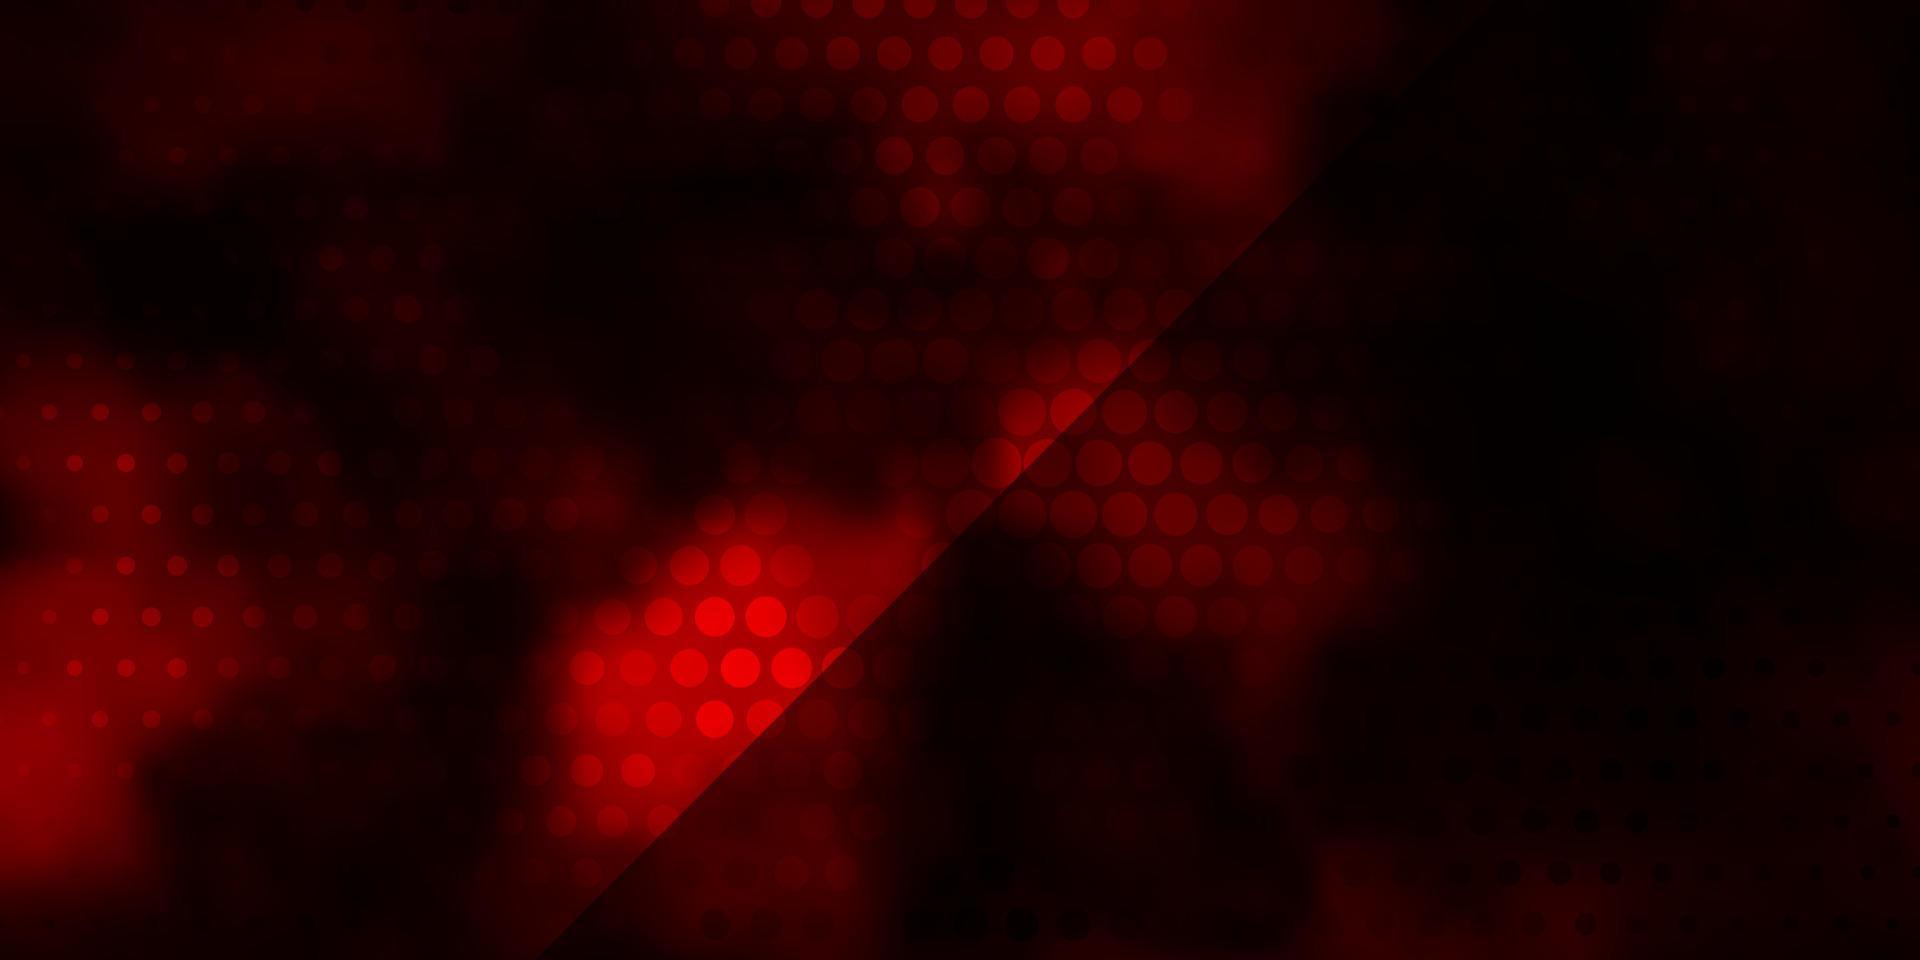 Red abstract wallpaper with a dark background - Dark red